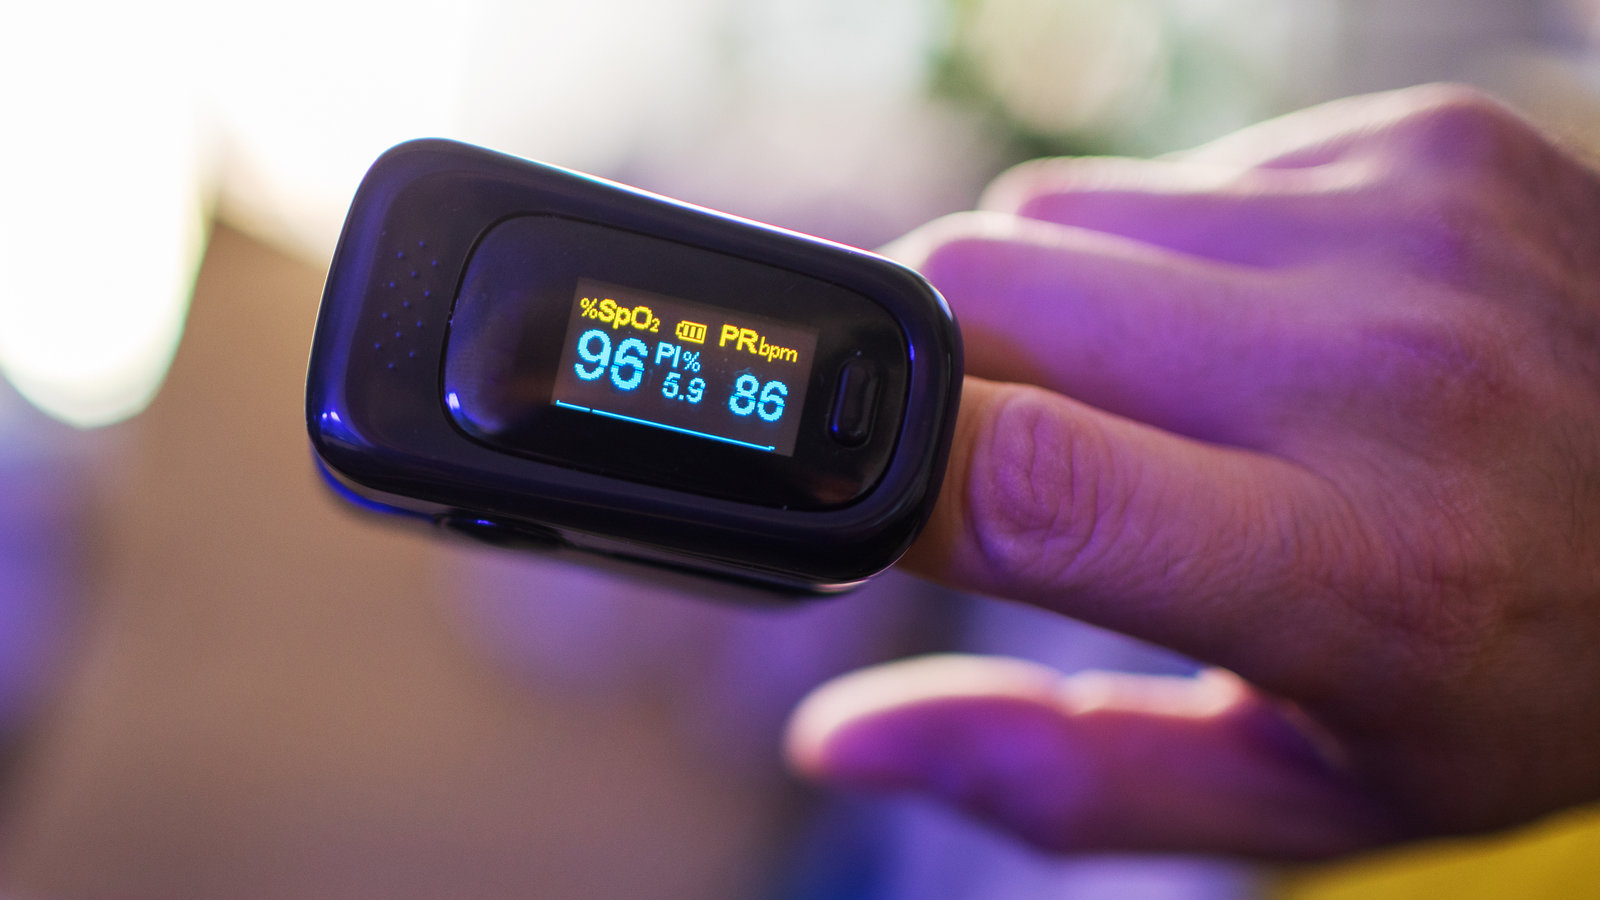 US$ 2.14 Bn Pulse Oximeters Market Demand 2022, Growth Statistics, Largest Manufacturers and Forecast Report 2027